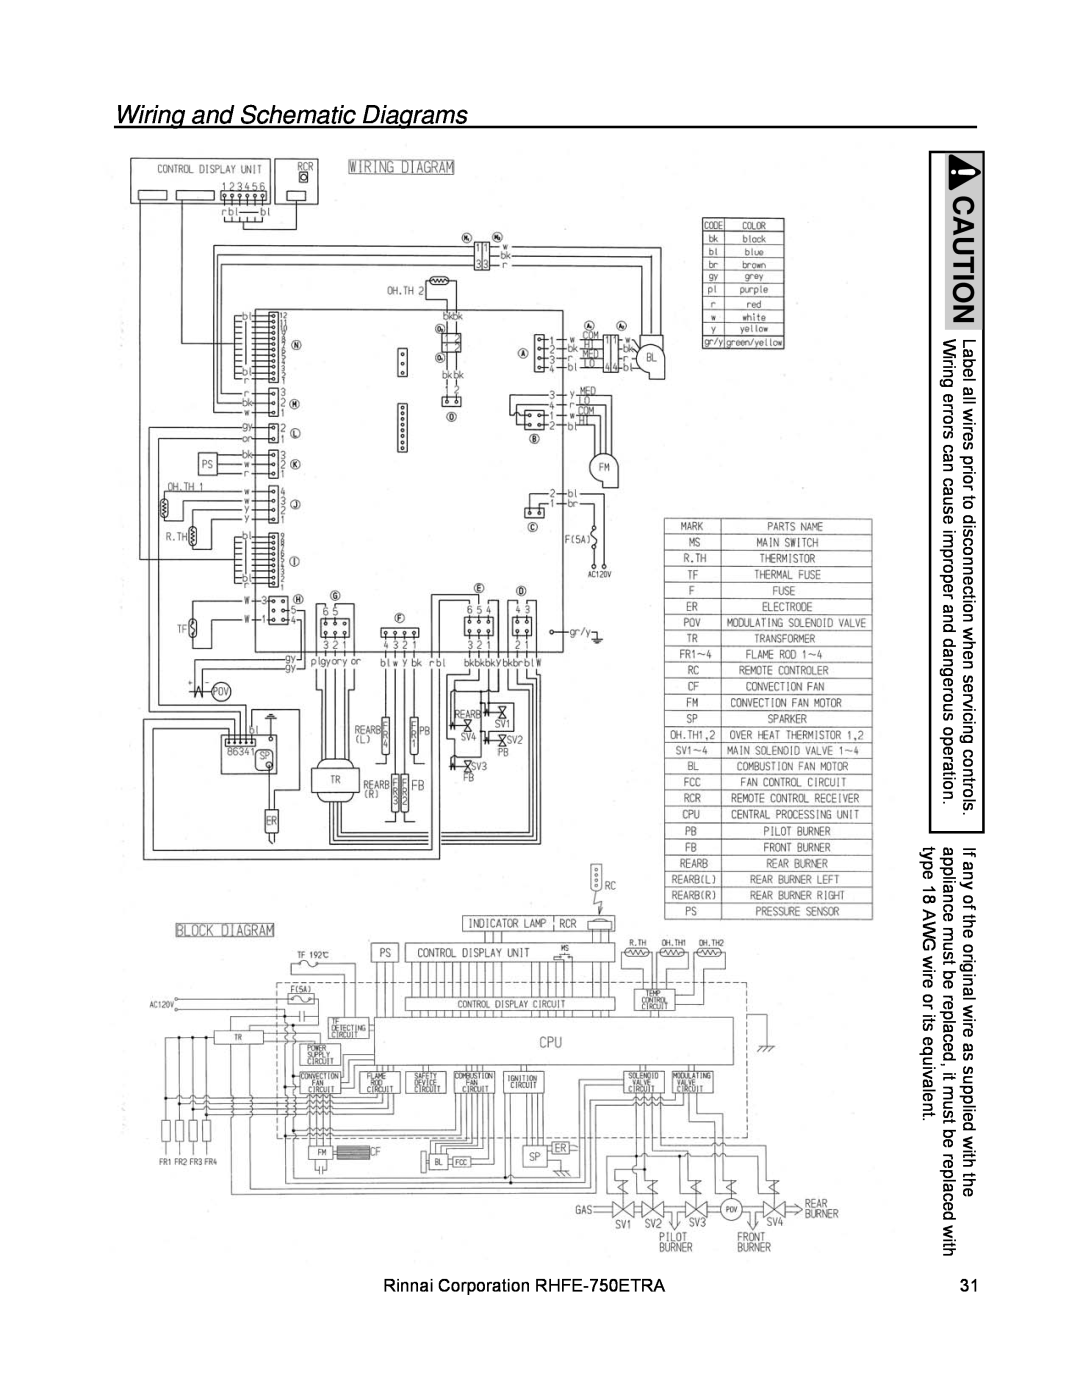 Rinnai Wiring and Schematic Diagrams, type 18 AWG wire or its equivalent, Rinnai Corporation RHFE-750ETRA 